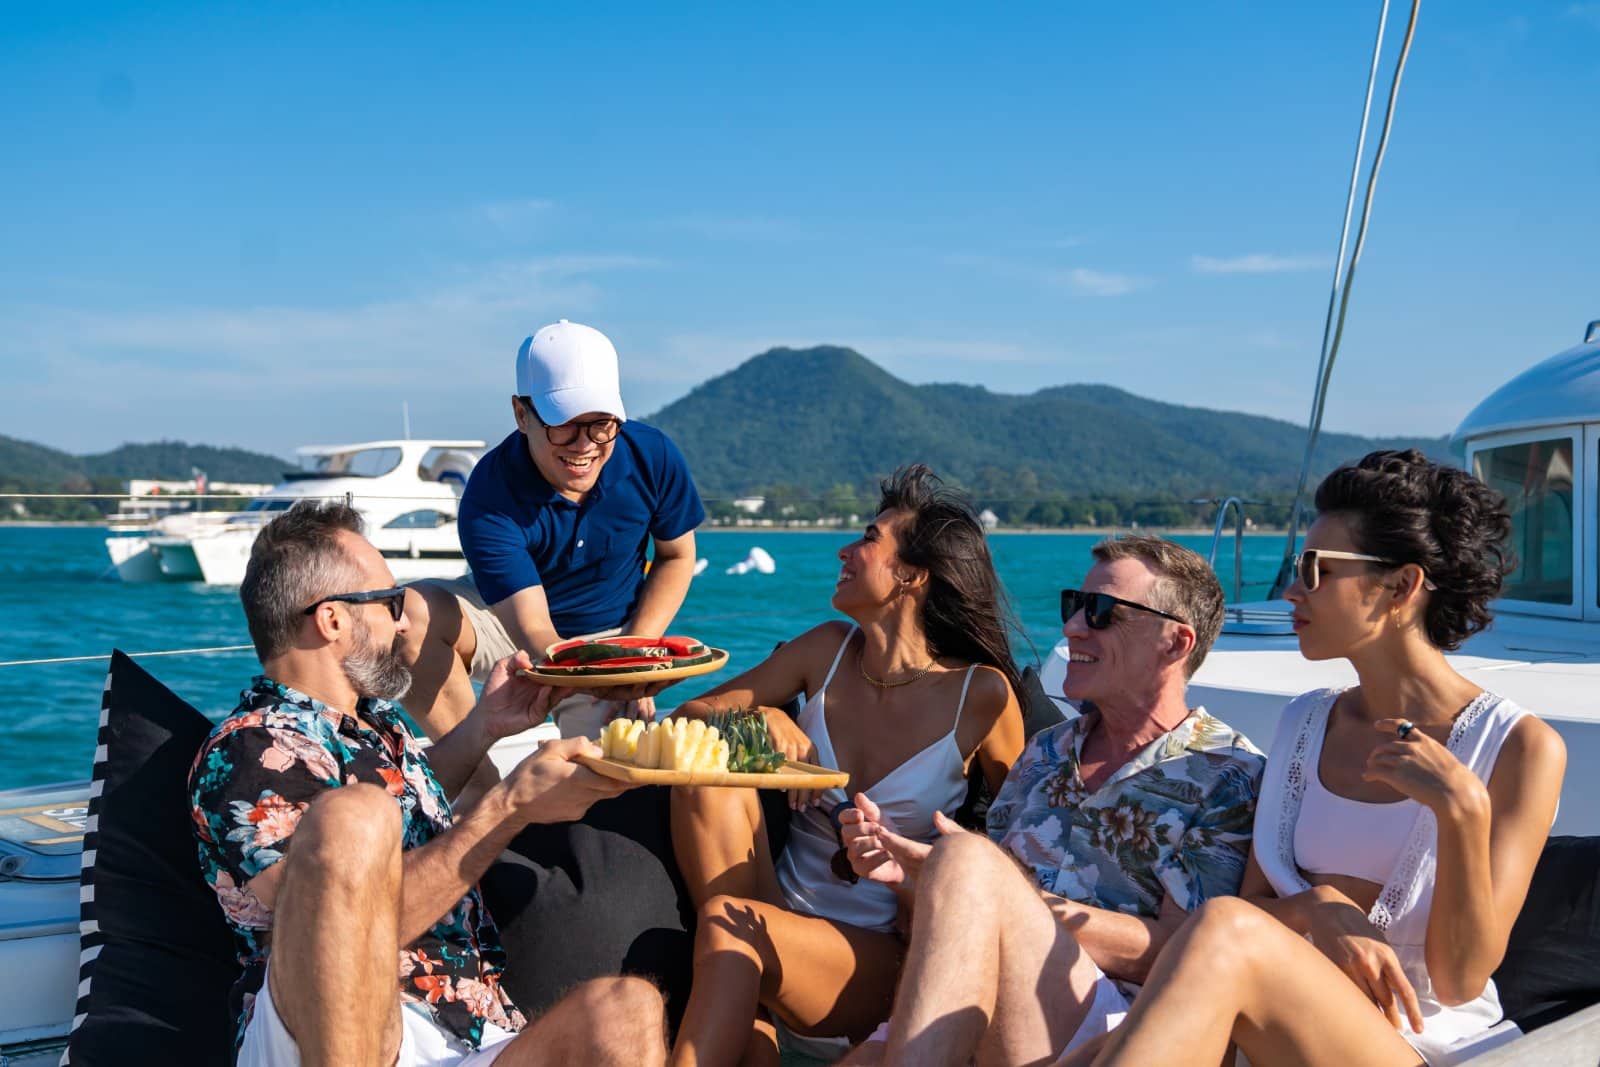 <p class="wp-caption-text">Image Credit: Shutterstock / CandyRetriever</p>  <p>Join the crew of luxury yachts, working as everything from a deckhand to a chef. It’s hard work but comes with the perk of sailing to exclusive locations. Experience and certifications like STCW are often required.</p>